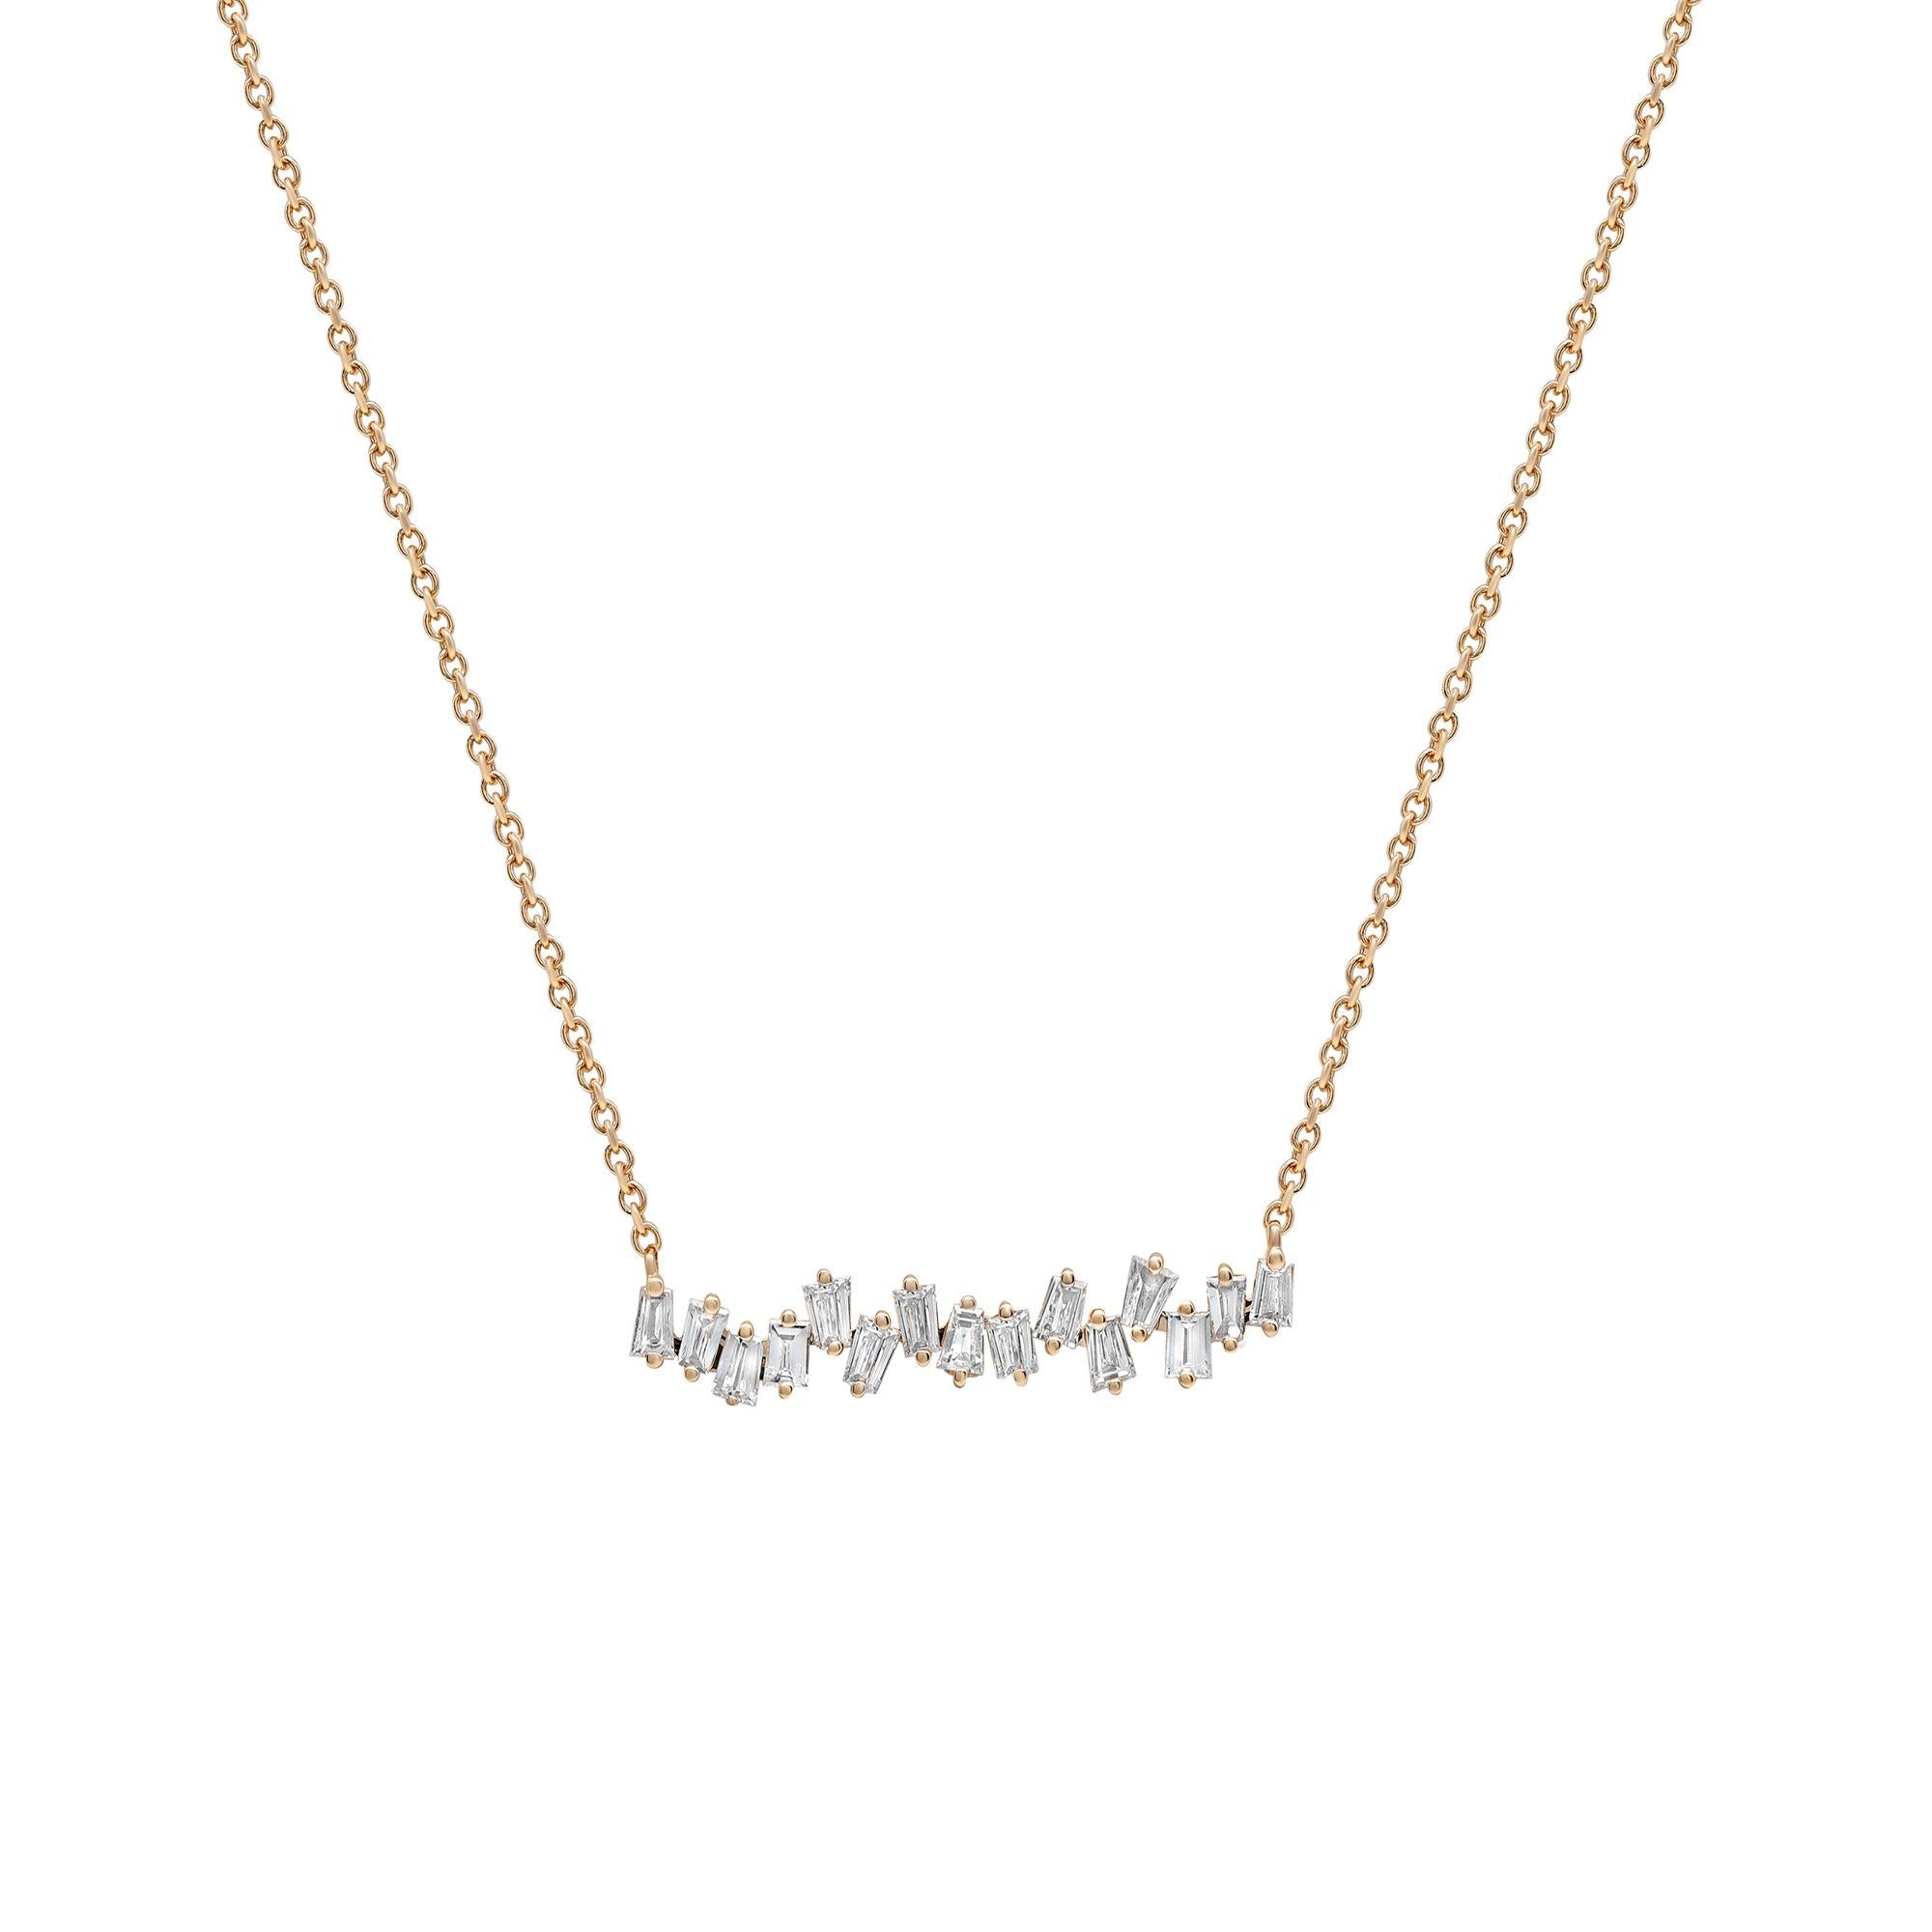 Rachel Koen 1.02cttw Baguette Cut Diamond Cluster Bar Necklace 18K Yellow Gold In New Condition For Sale In New York, NY